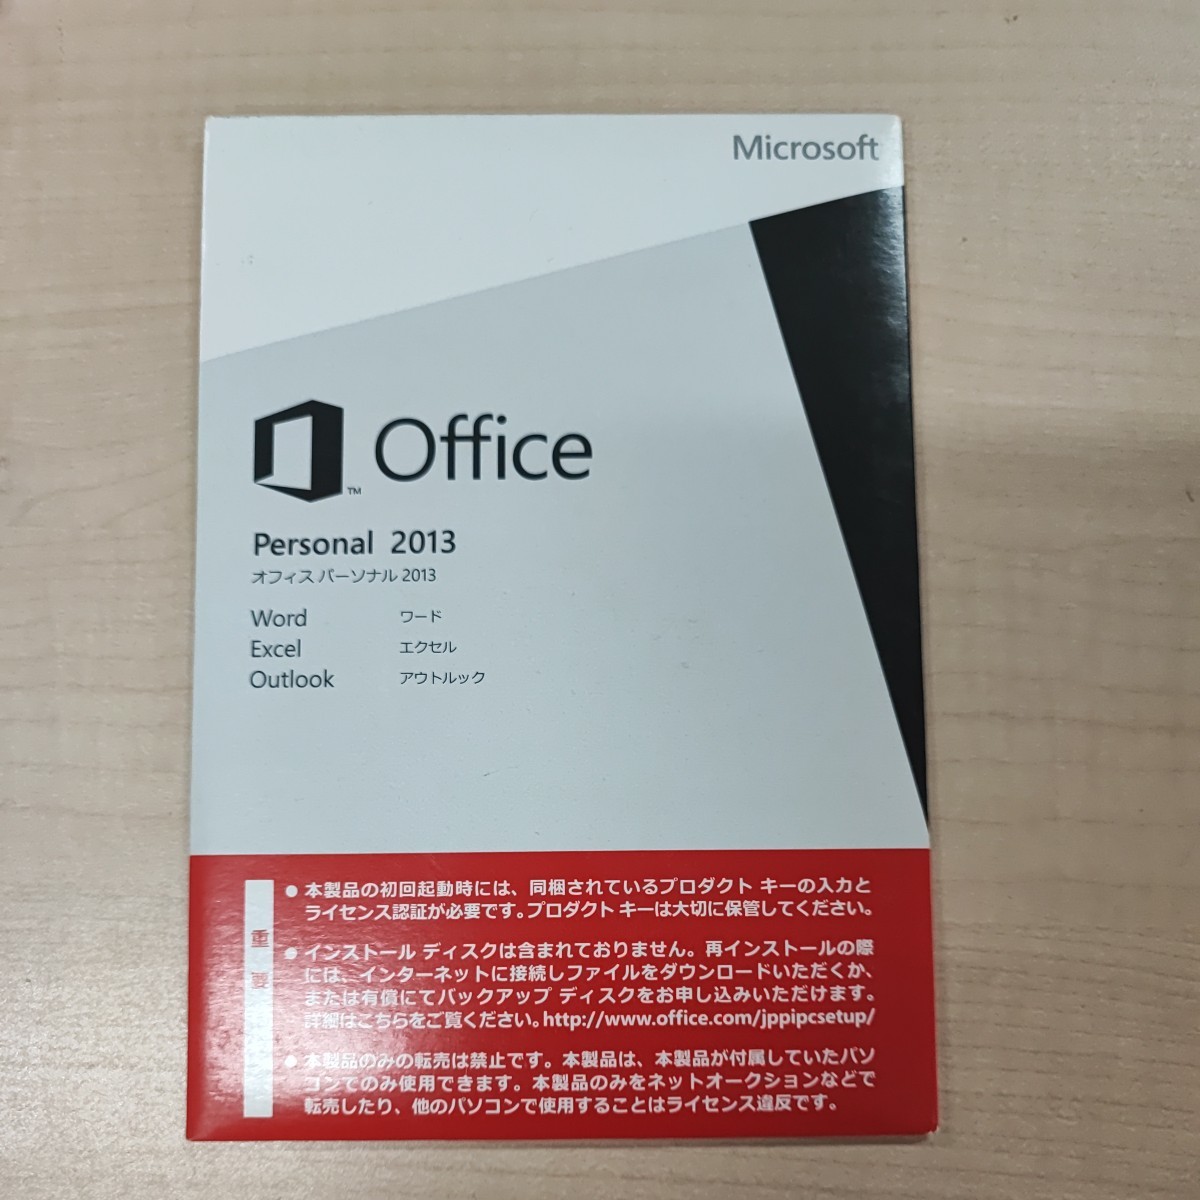 (E00151) 新品未開封 Microsoft Office 2013 Personal Word Excel Outlook 送料無料